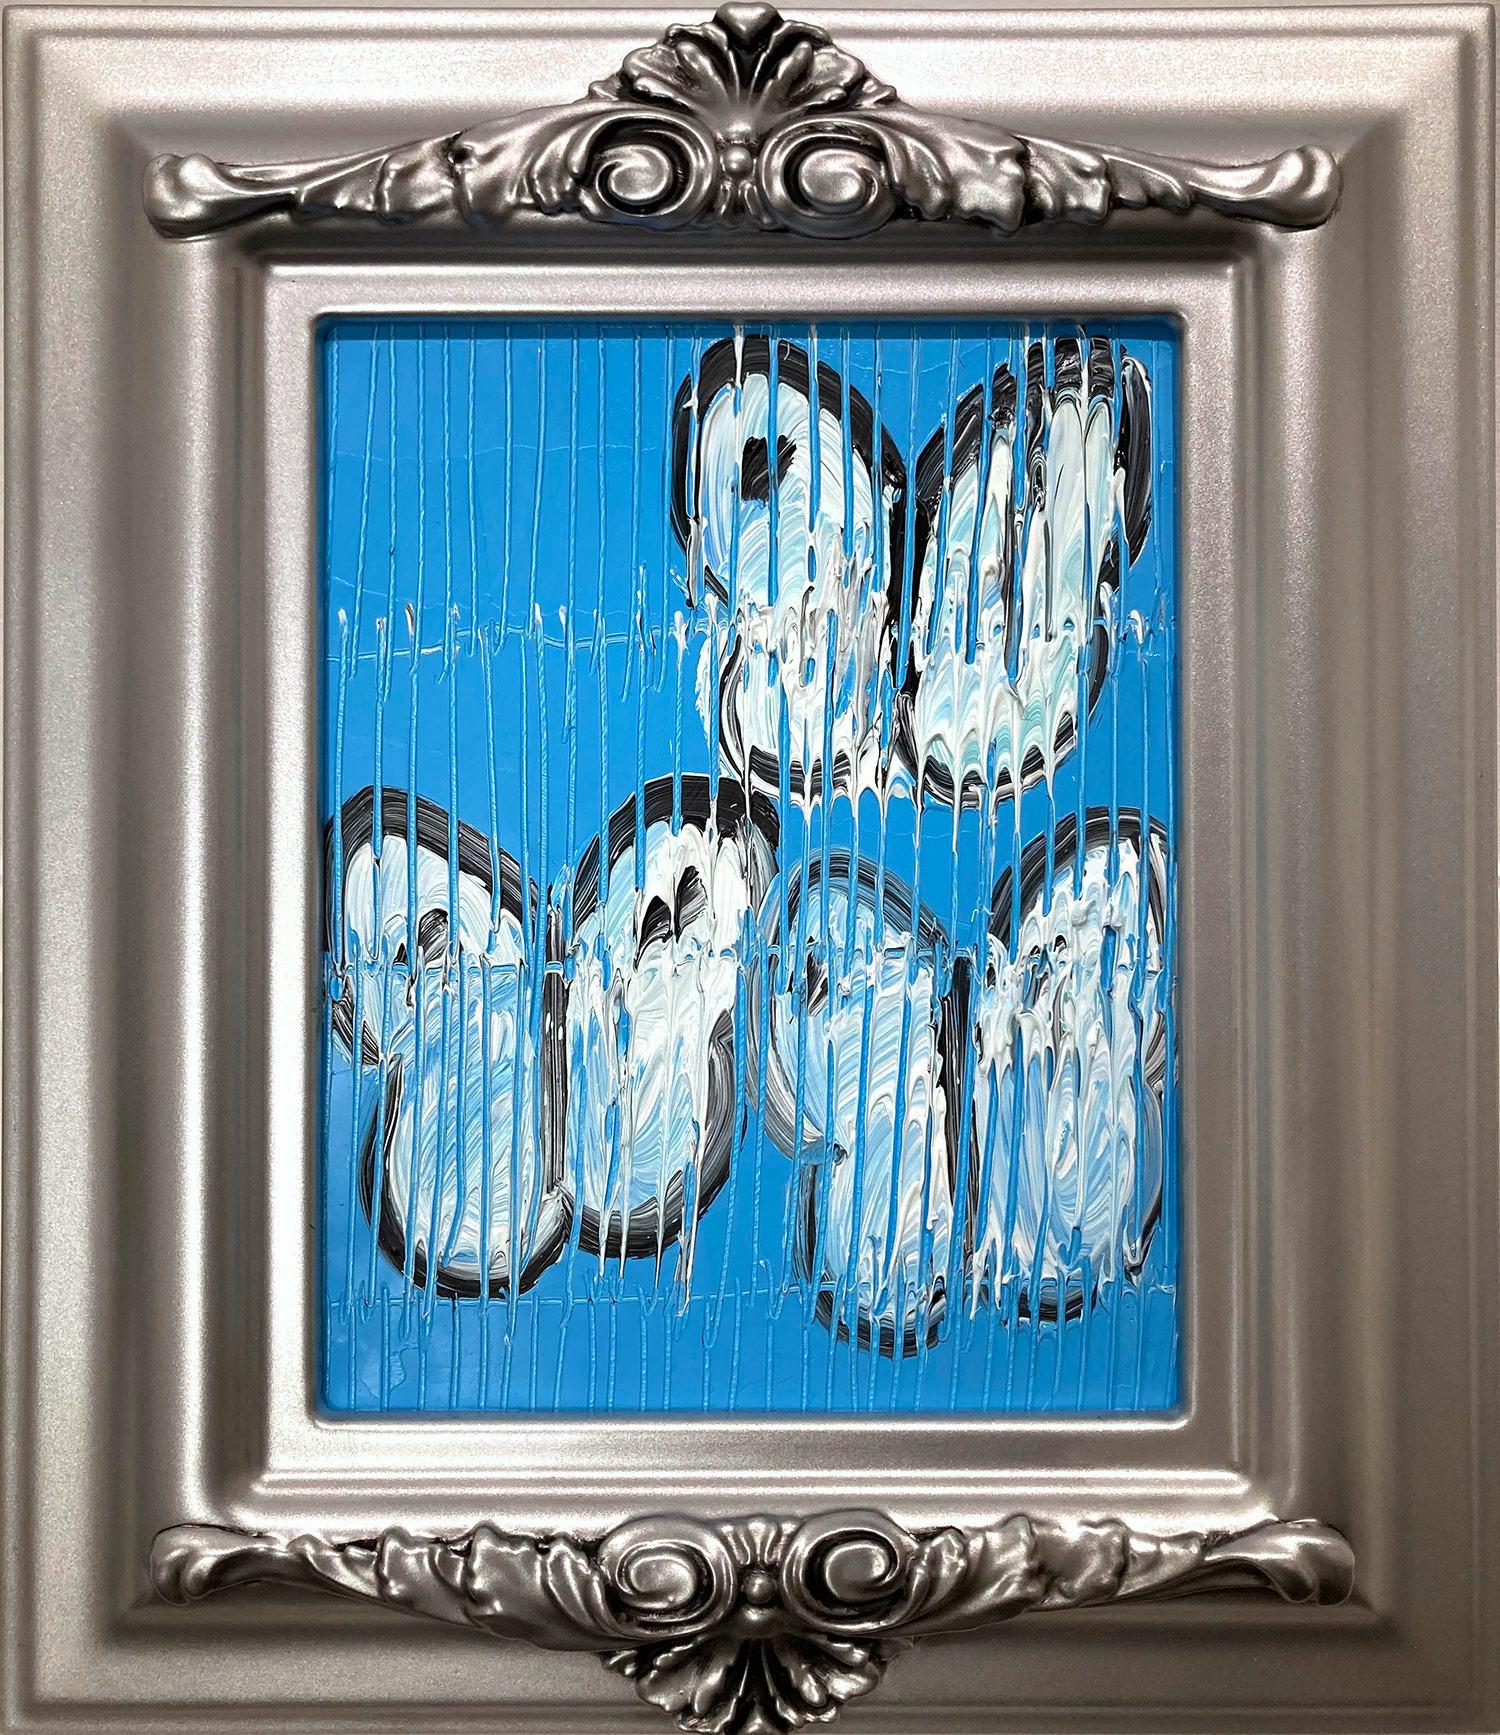 Hunt Slonem Abstract Painting - "Cabbage Butterflies" White Butterflies on Sky Blue Background with Scoring